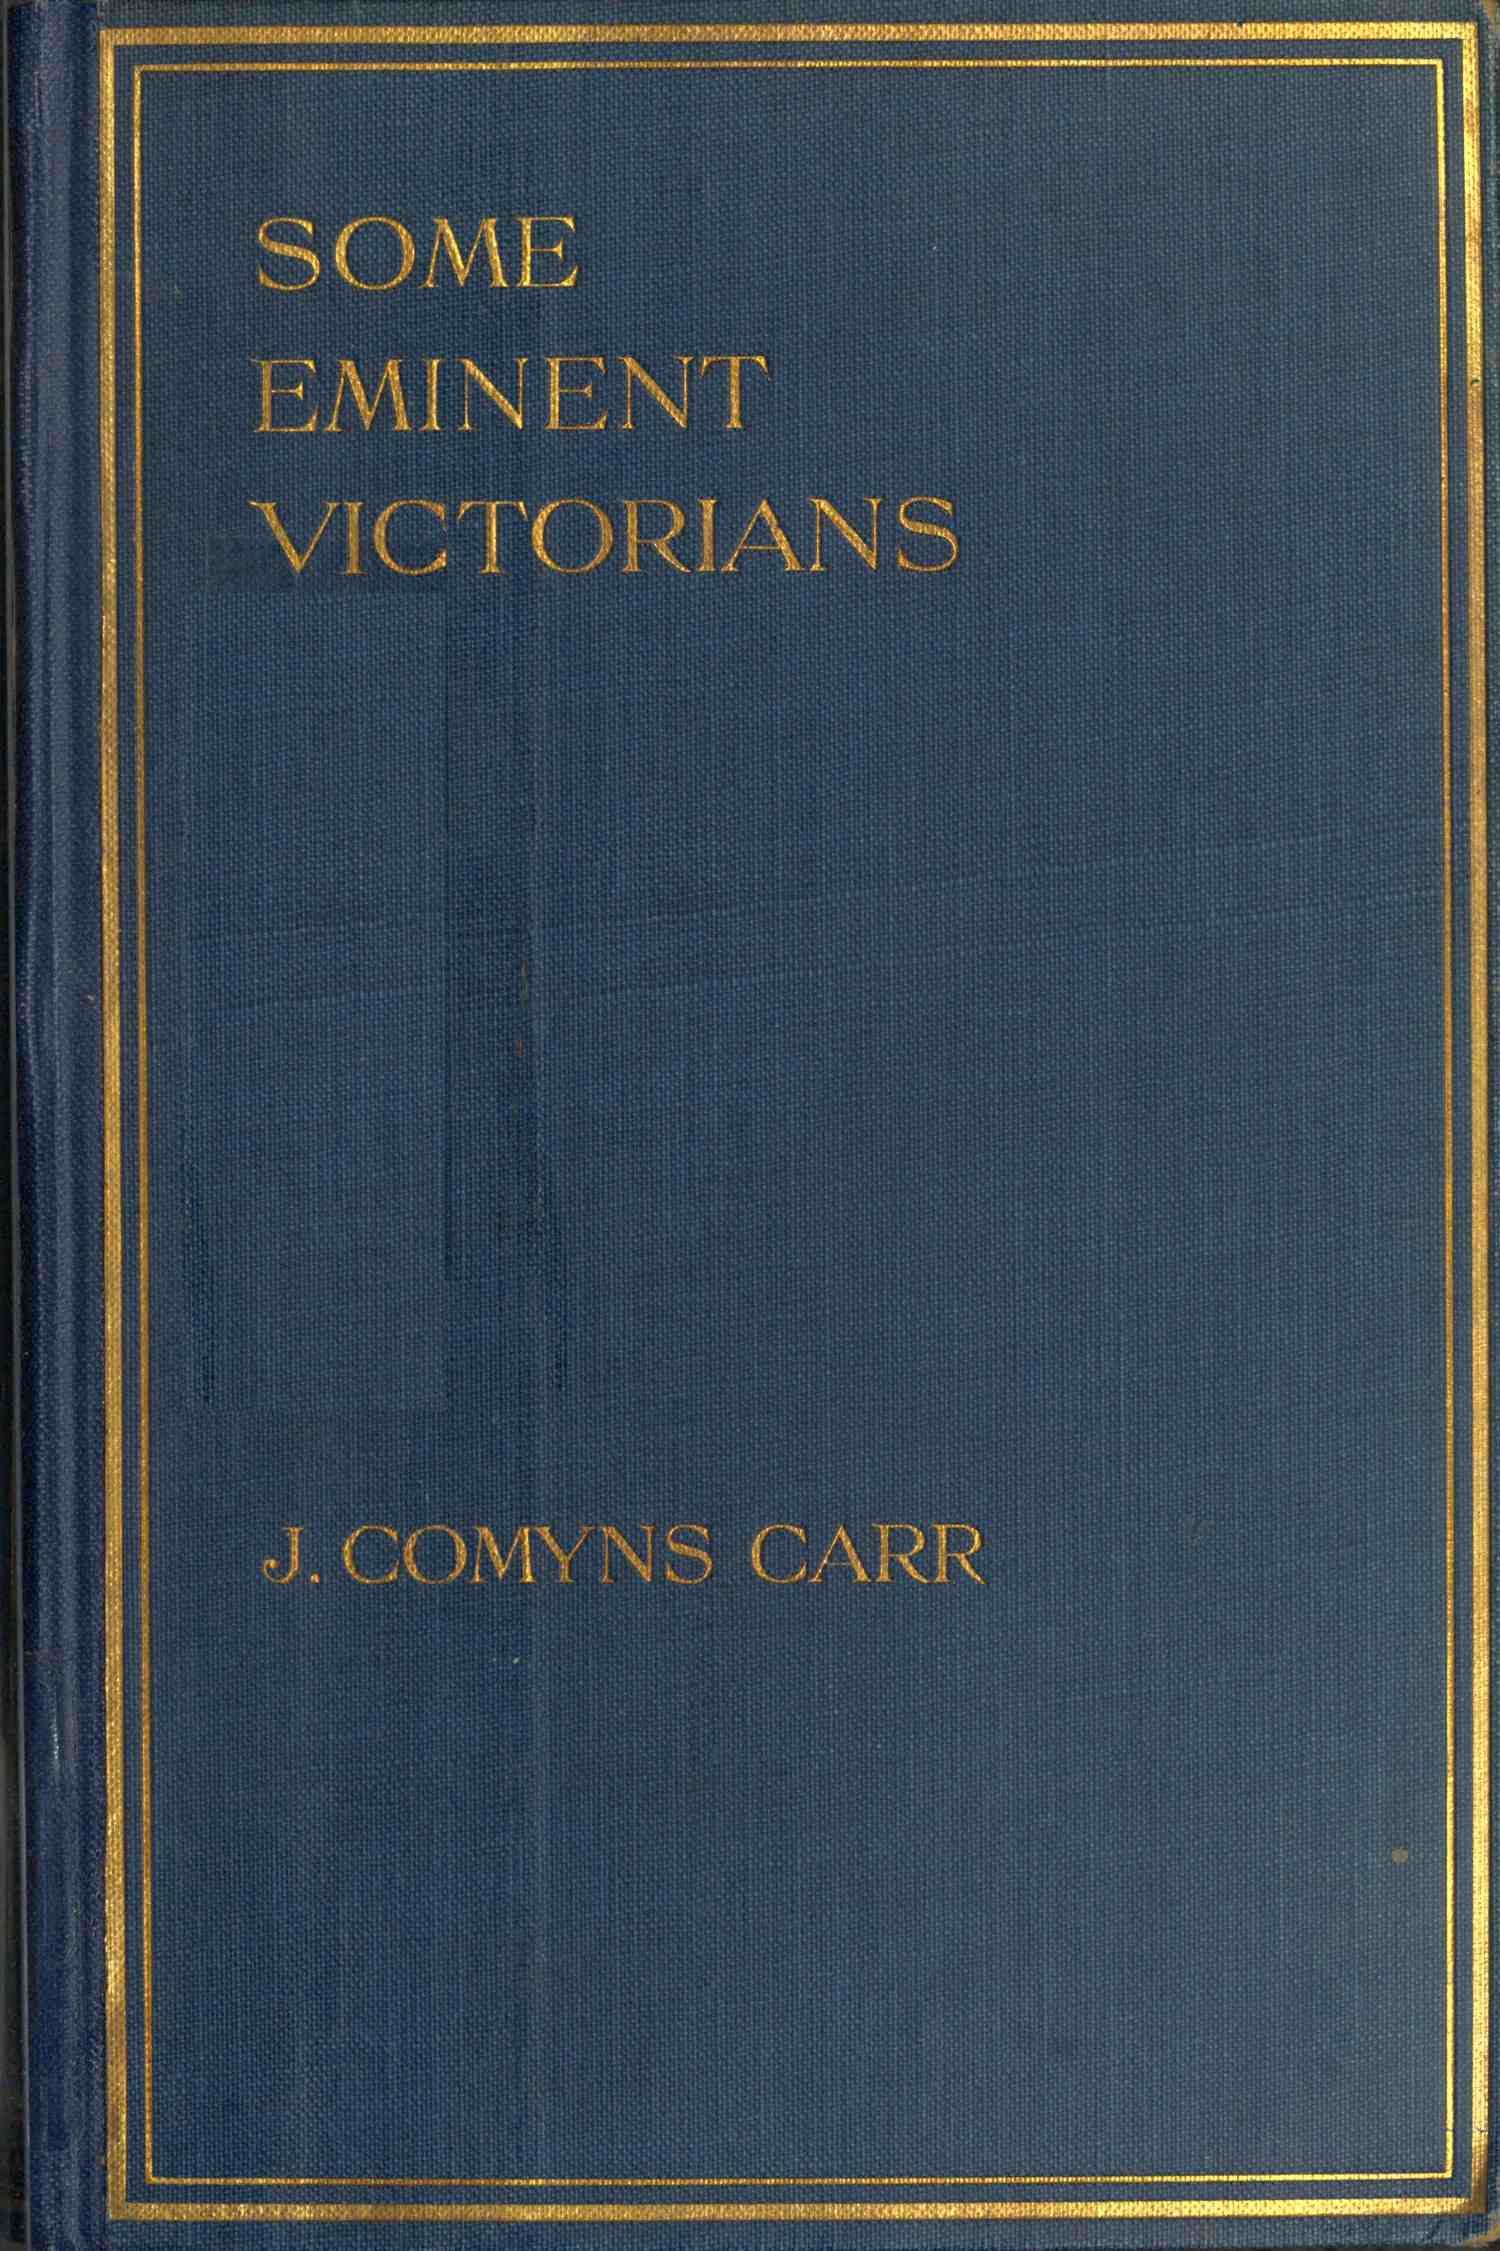 Some eminent Victorians: Personal recollections in the world of art and letters